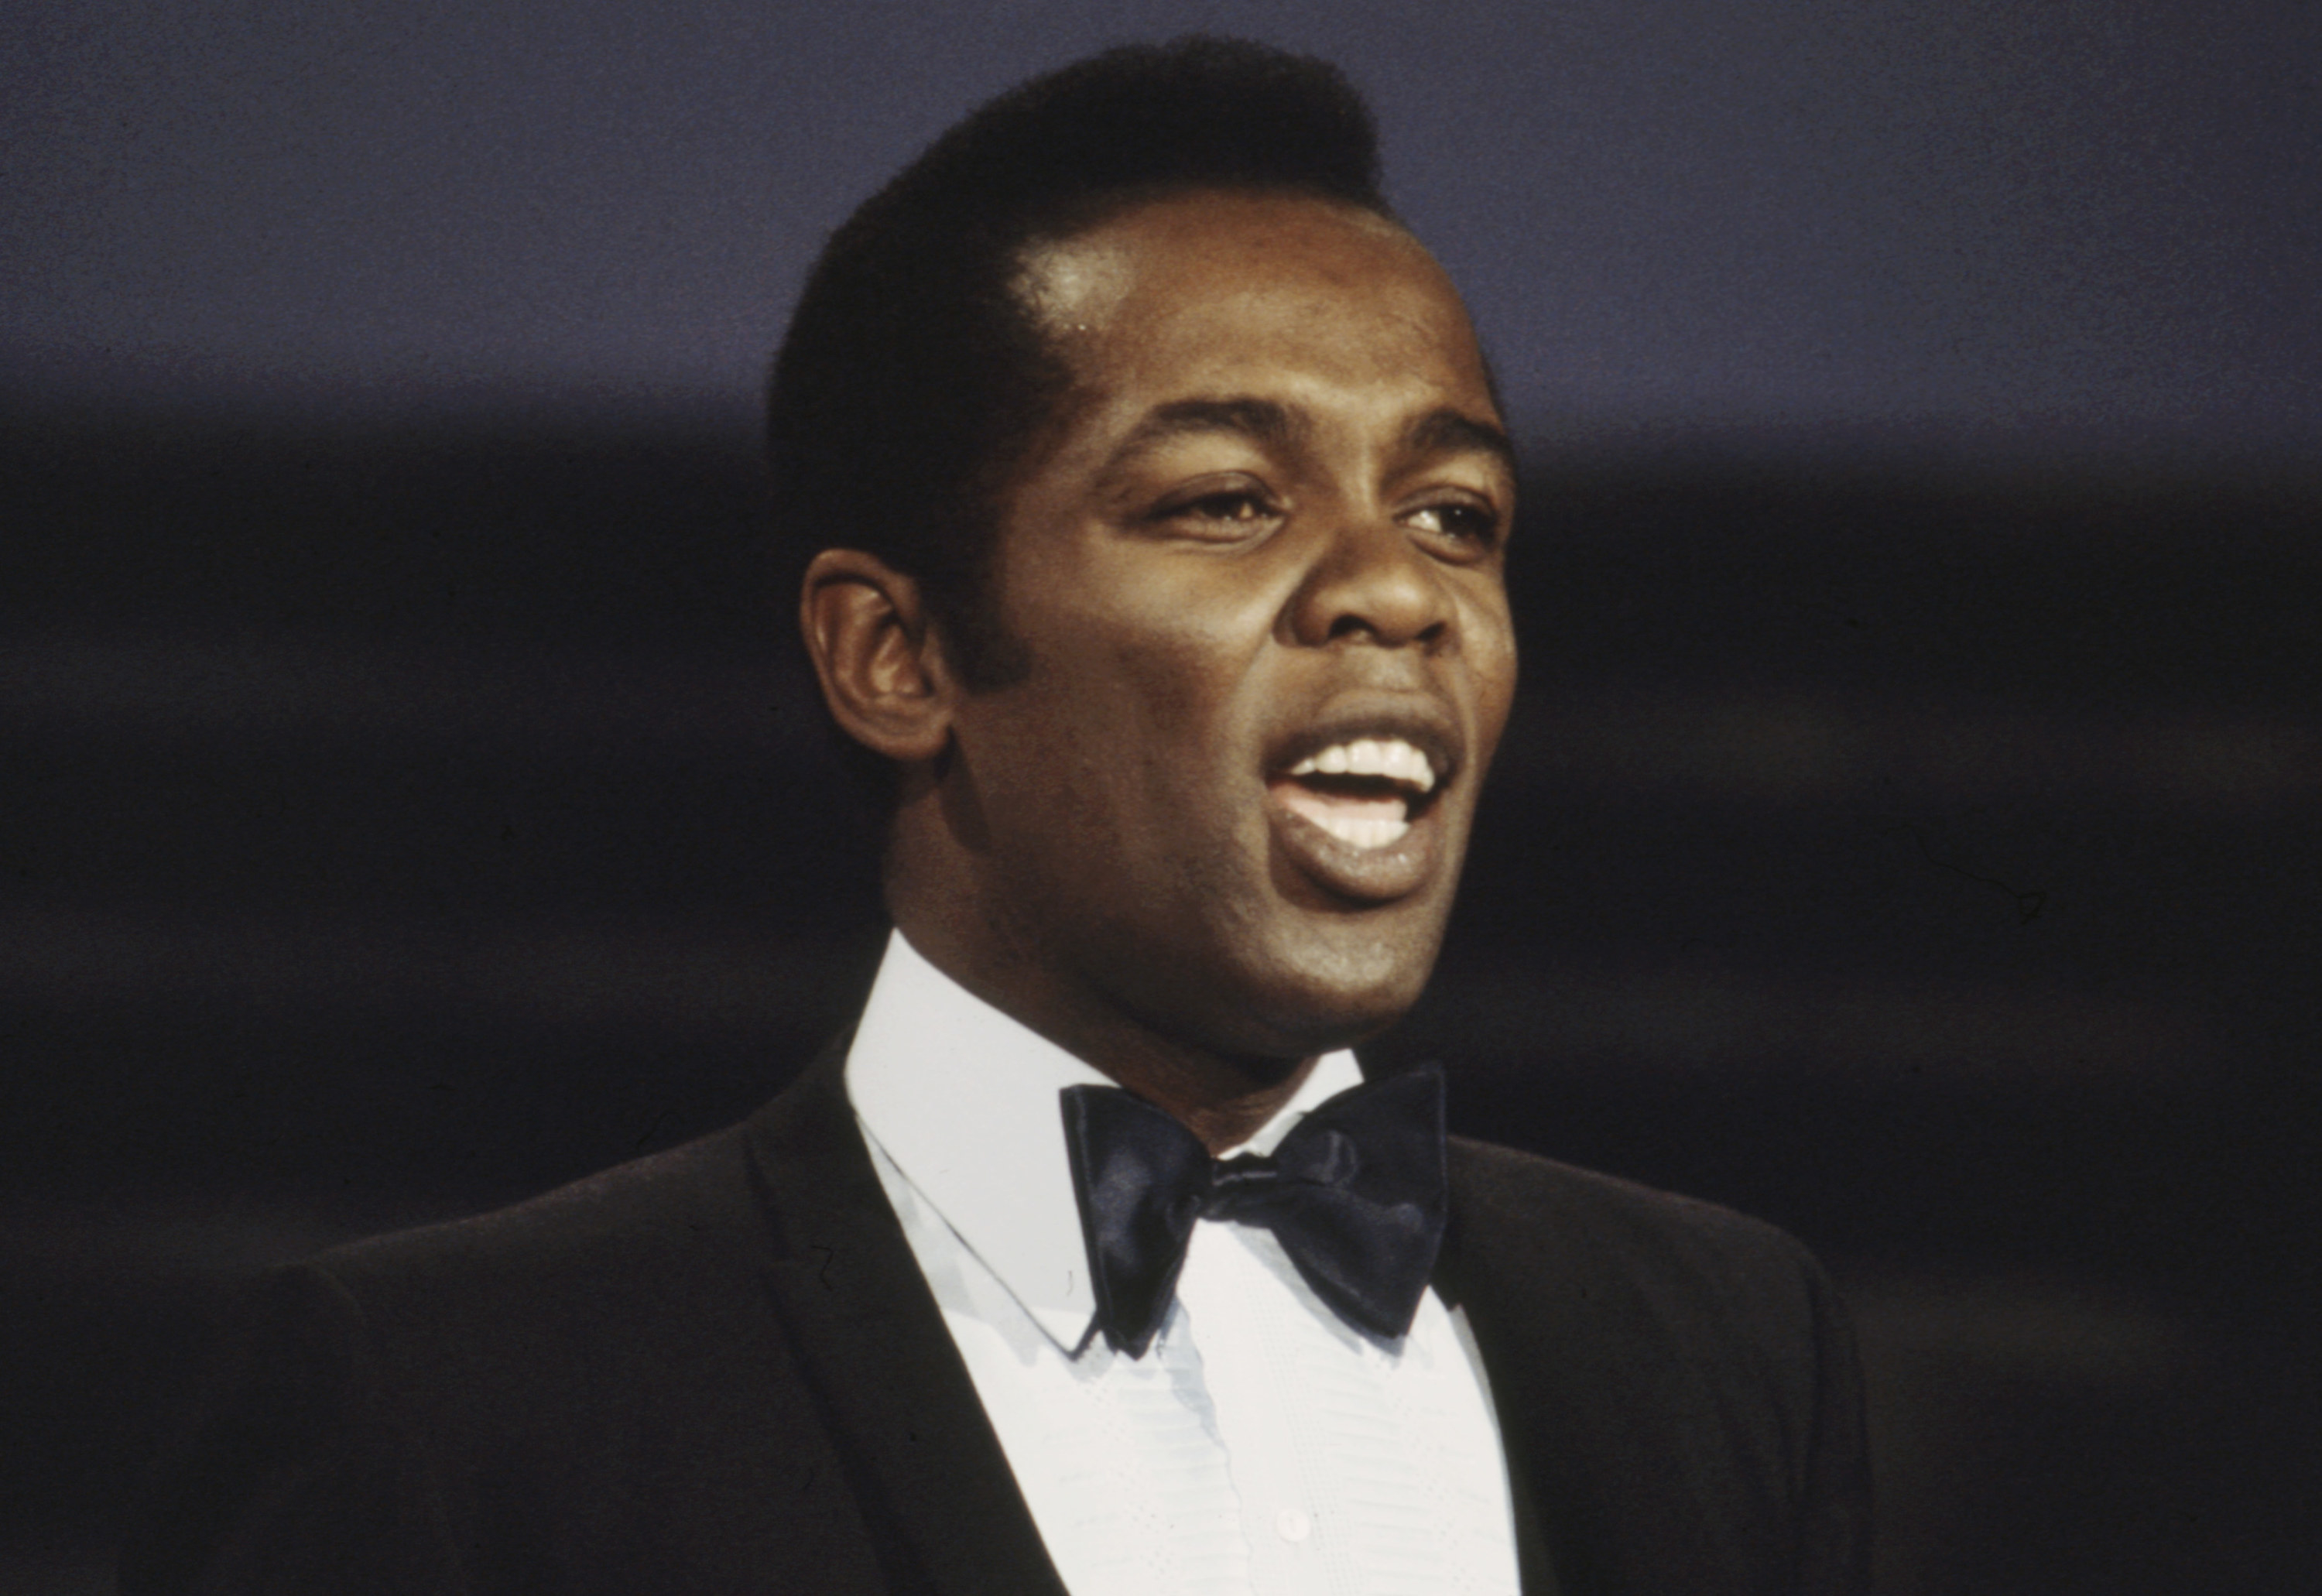 Lou Rawls performs on stage.